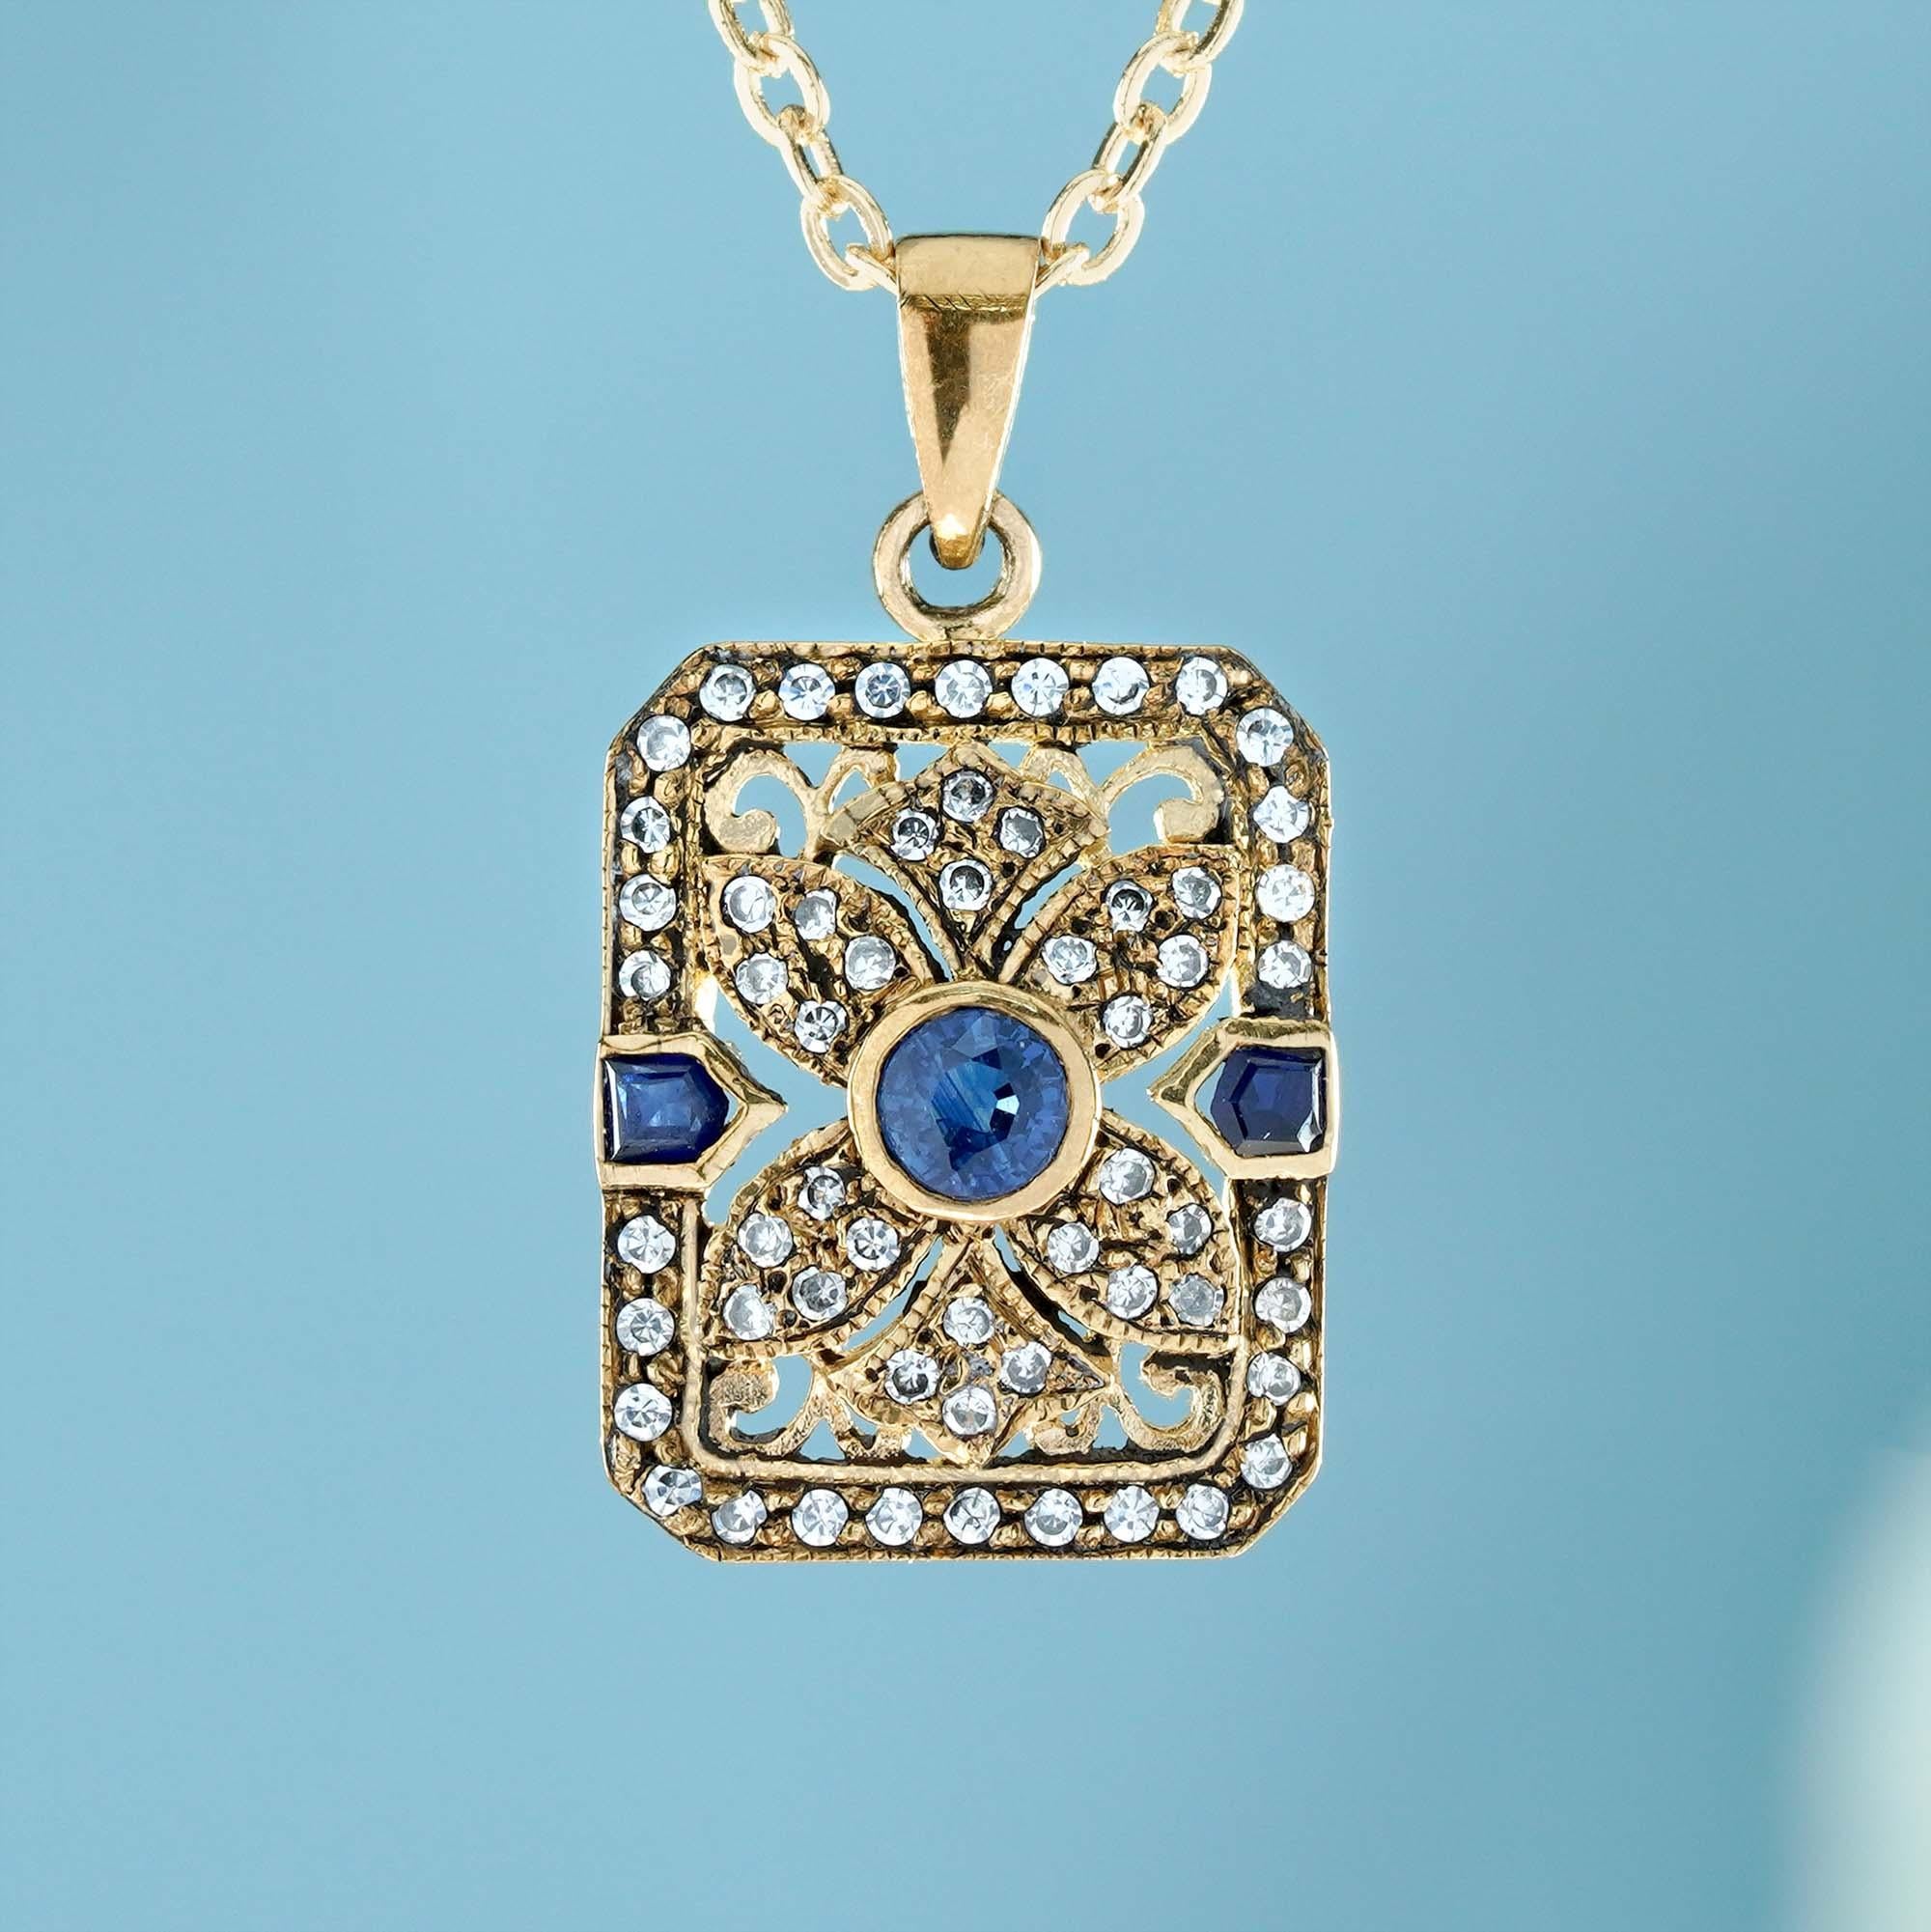 The pendant features a oval-shaped sapphire gemstone in the center, set in a bezel setting. The sapphire has a deep, rich blue color, and appears to be faceted, which means it’s been cut and polished to maximize its sparkle and brilliance. The